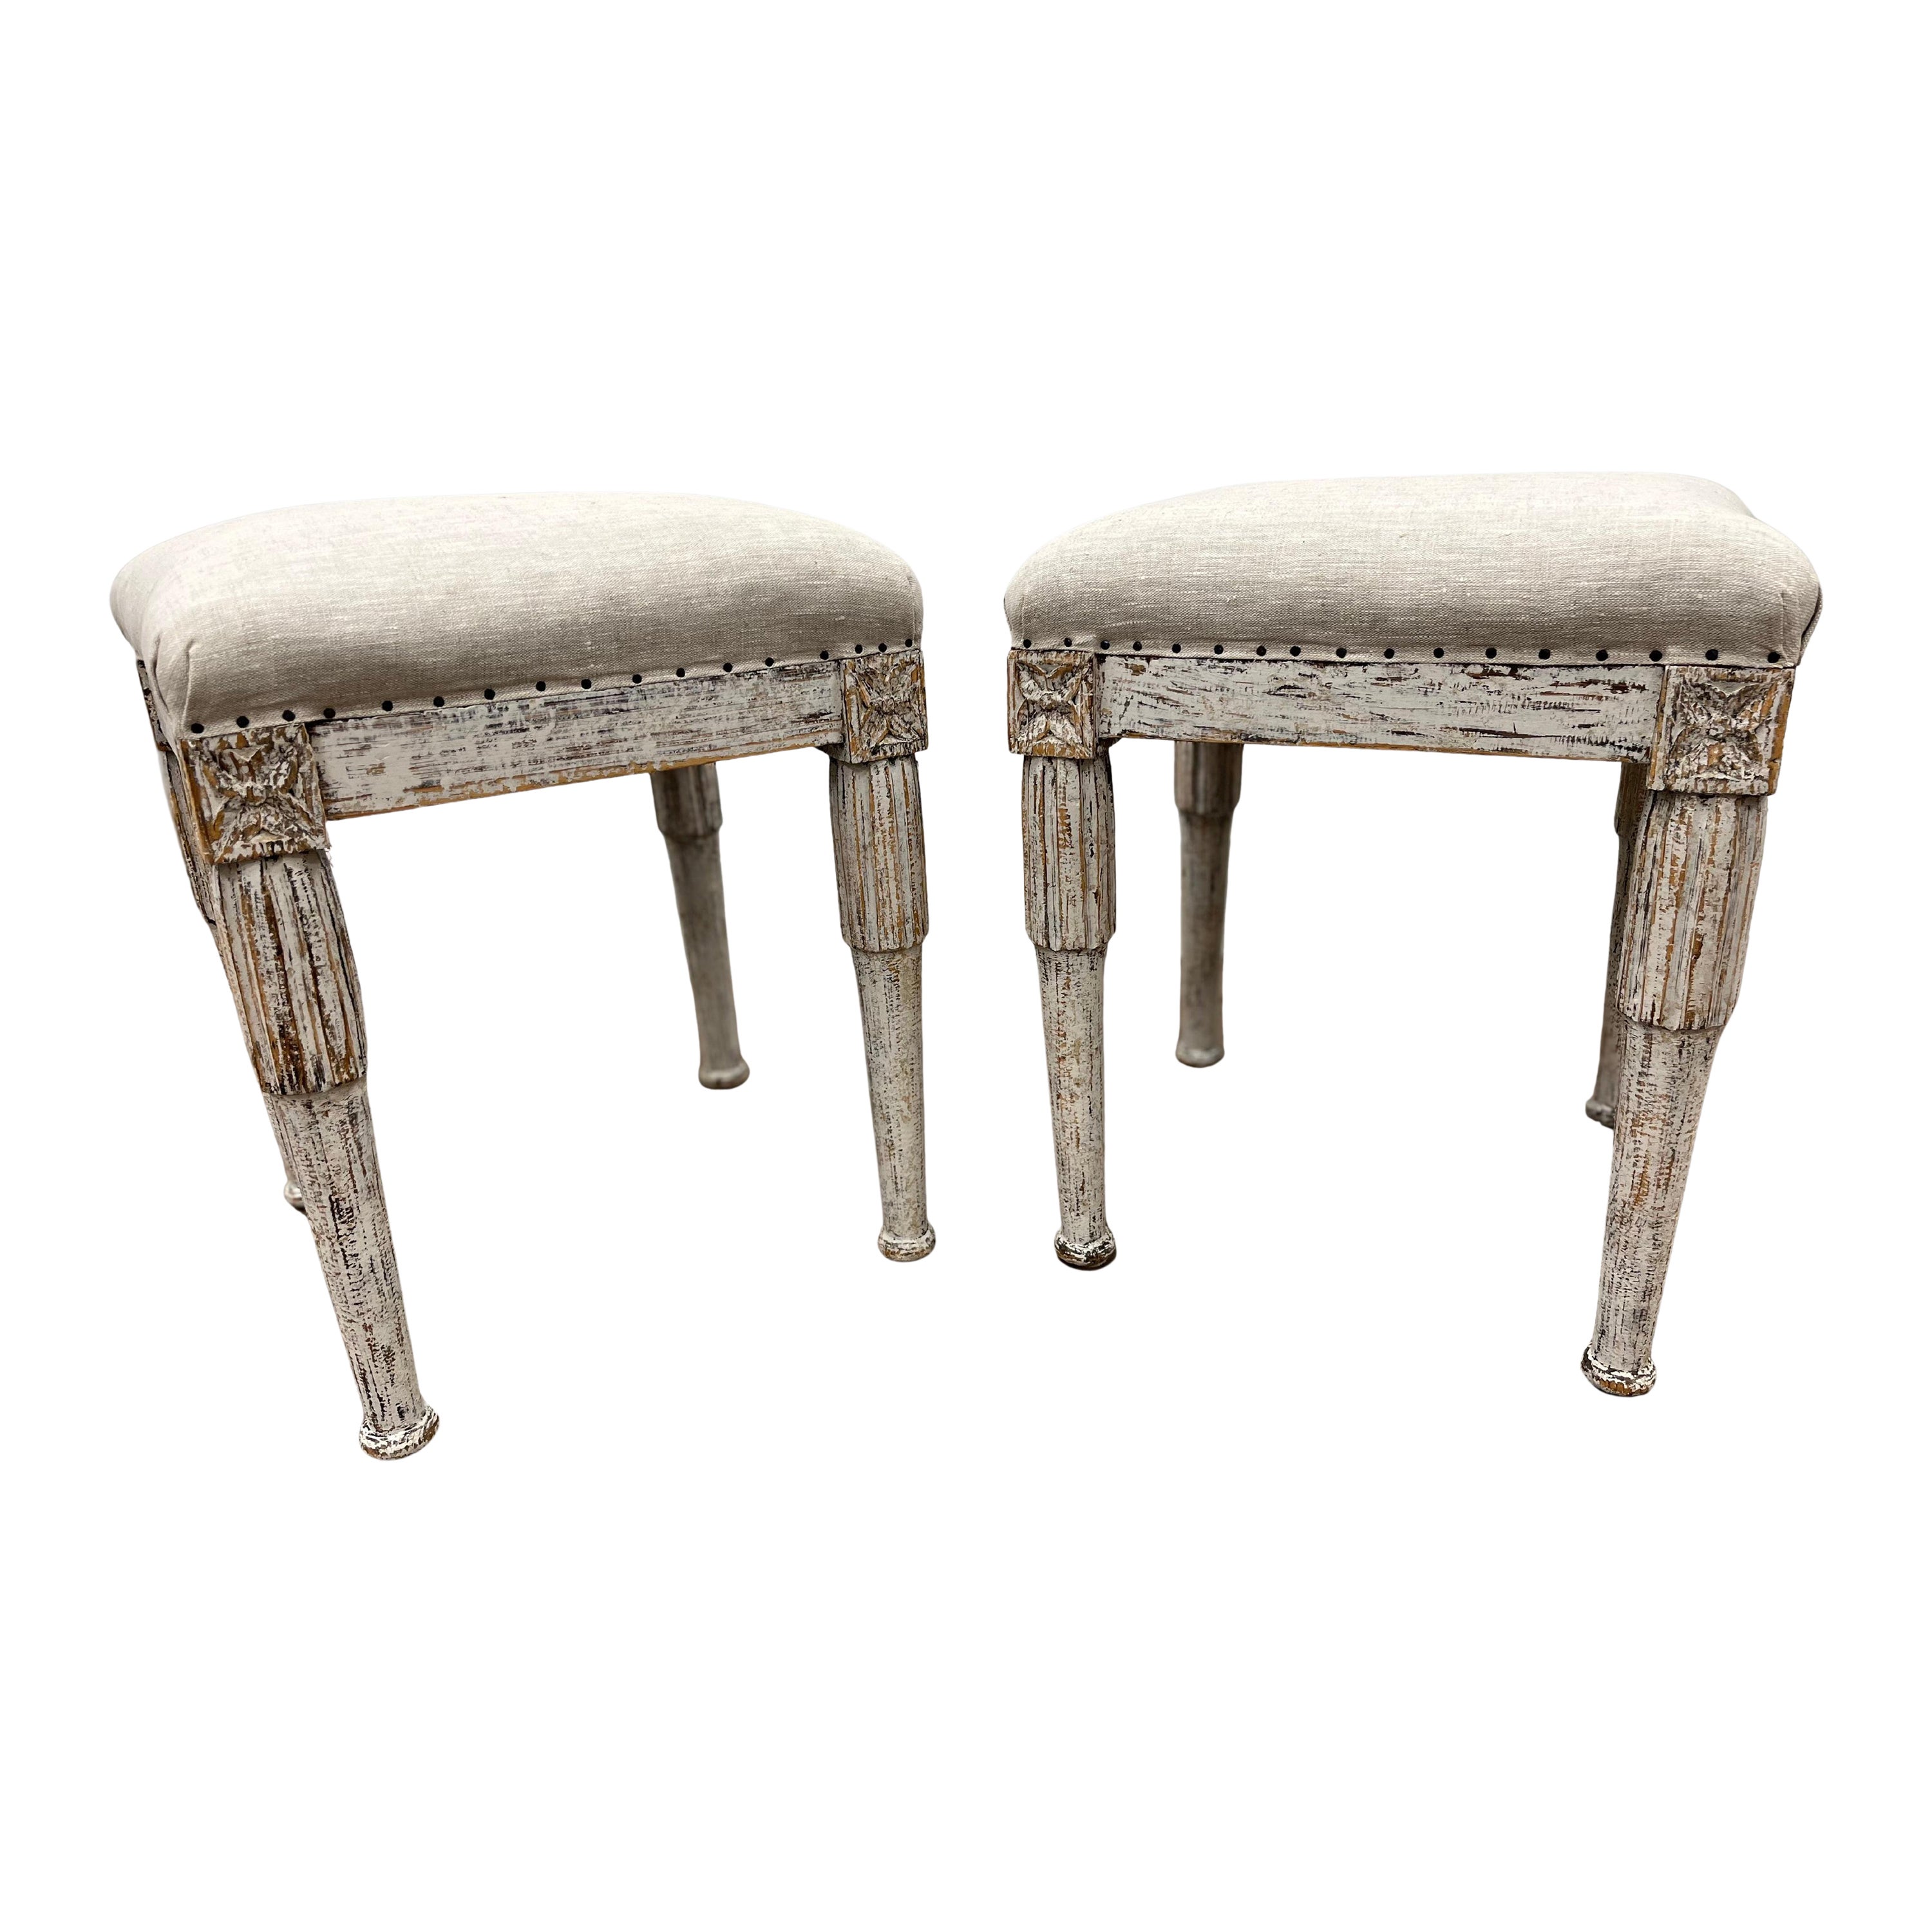 Pair of 19th Century Swedish Gustavian Style Footstools For Sale